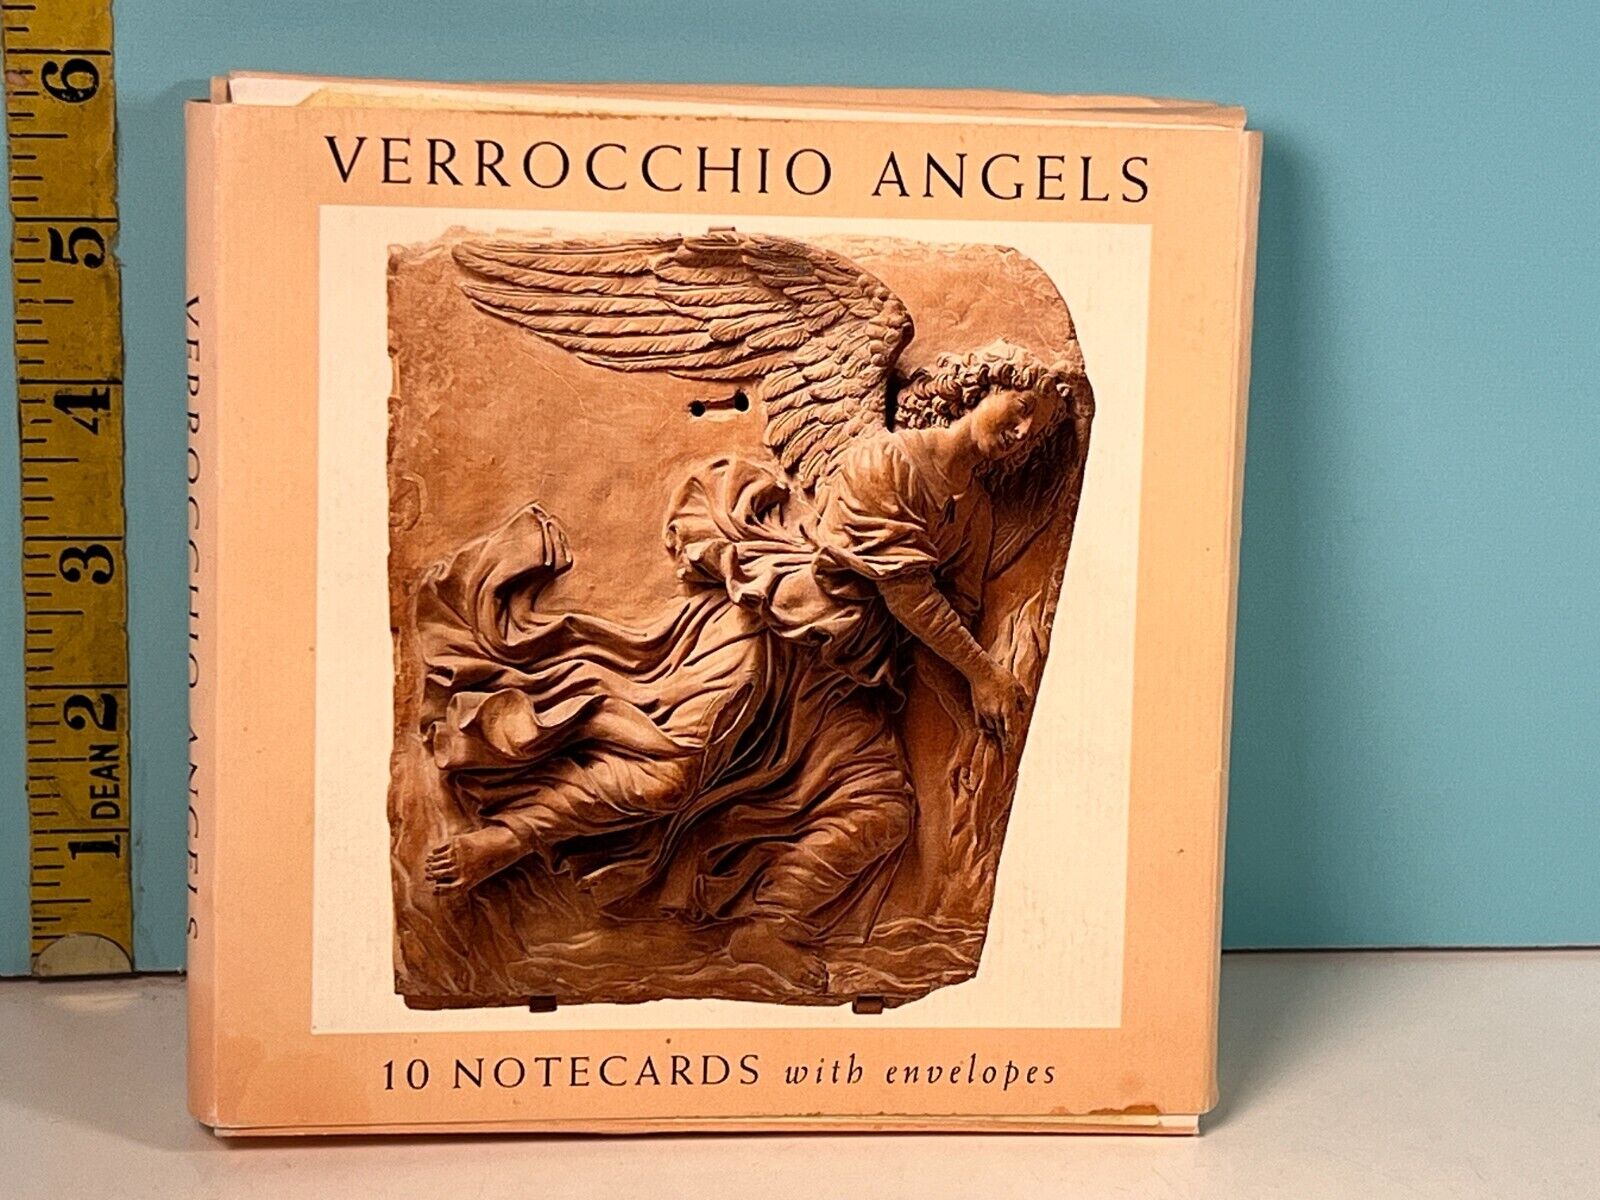 Vtg National Gallery Verrocchio Angels ten Notecards and Envelopes in folder.